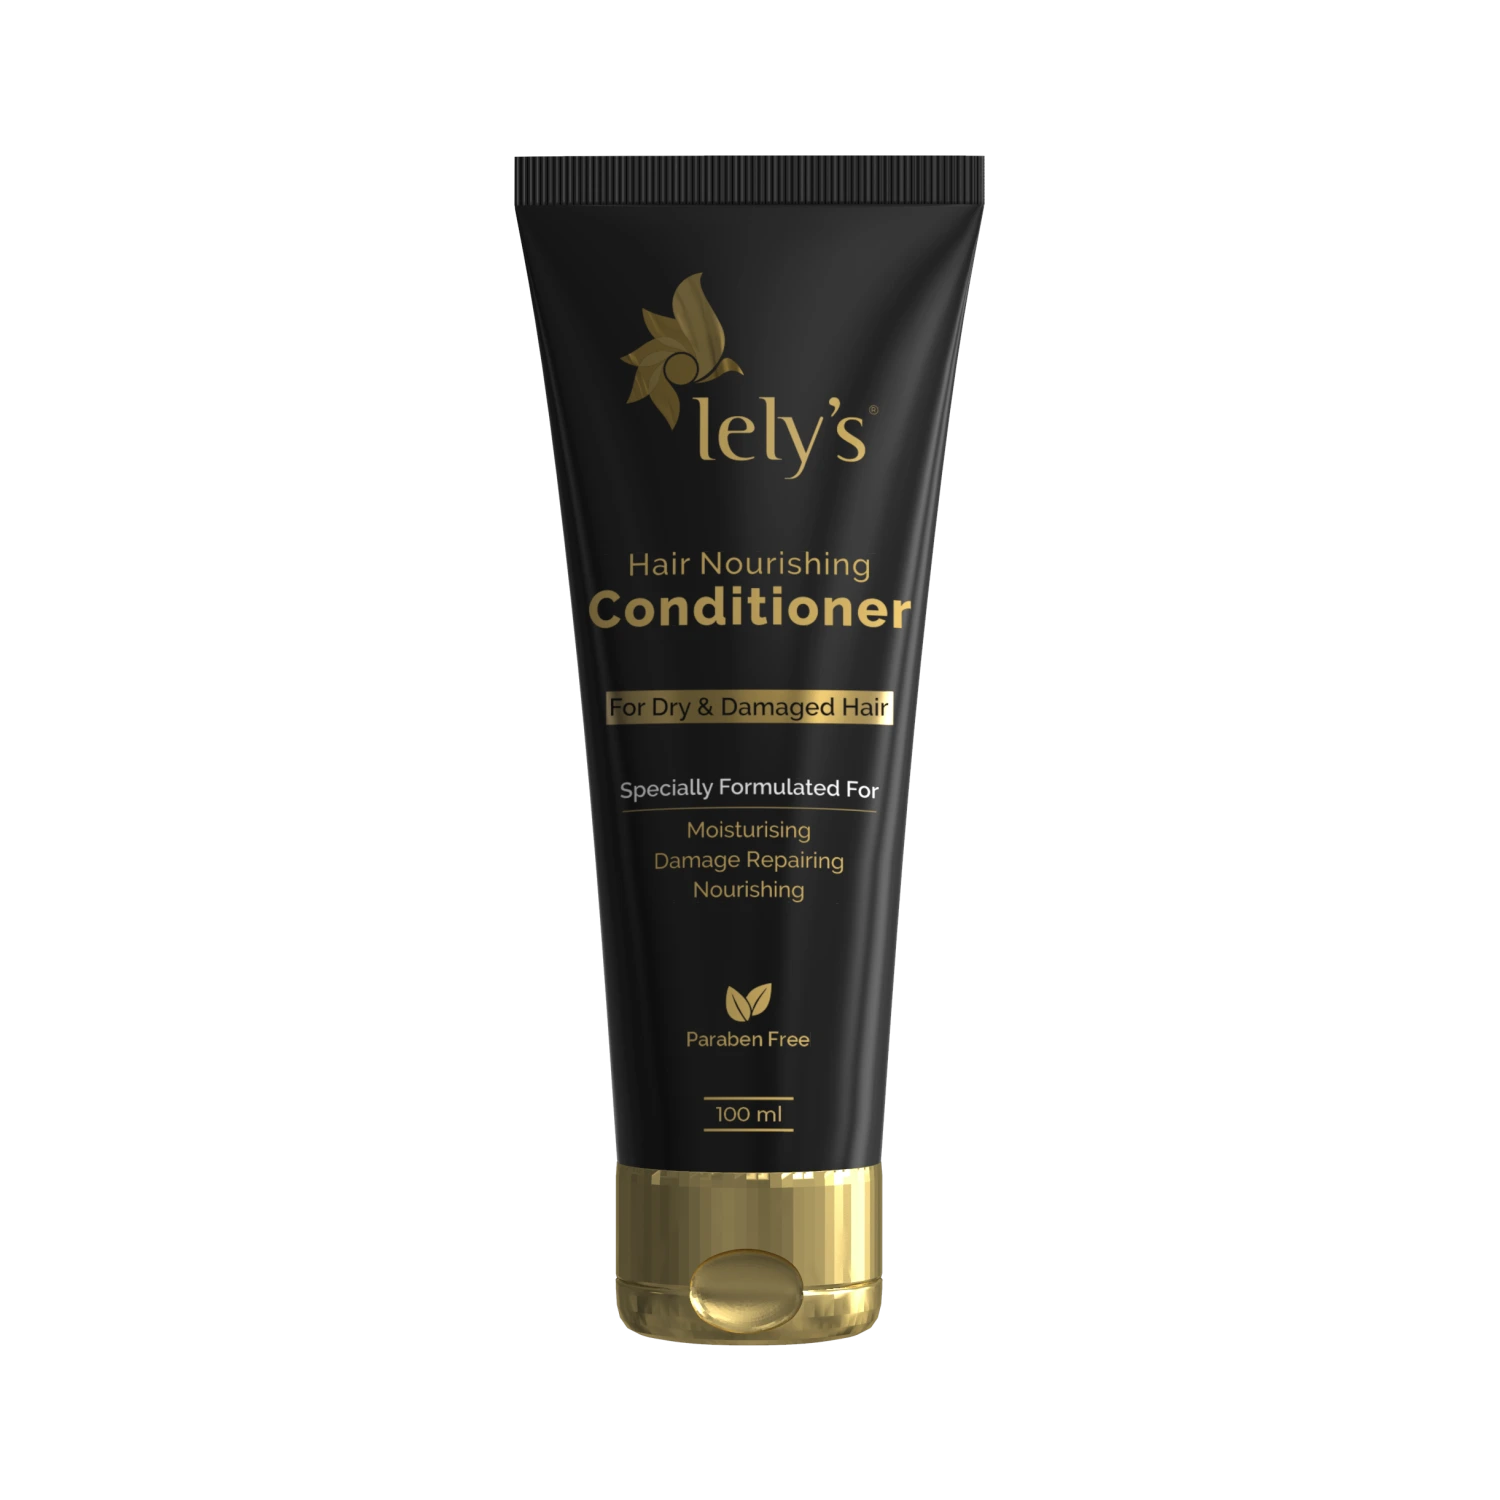 Lely's Best Hair Nourishing Conditioner